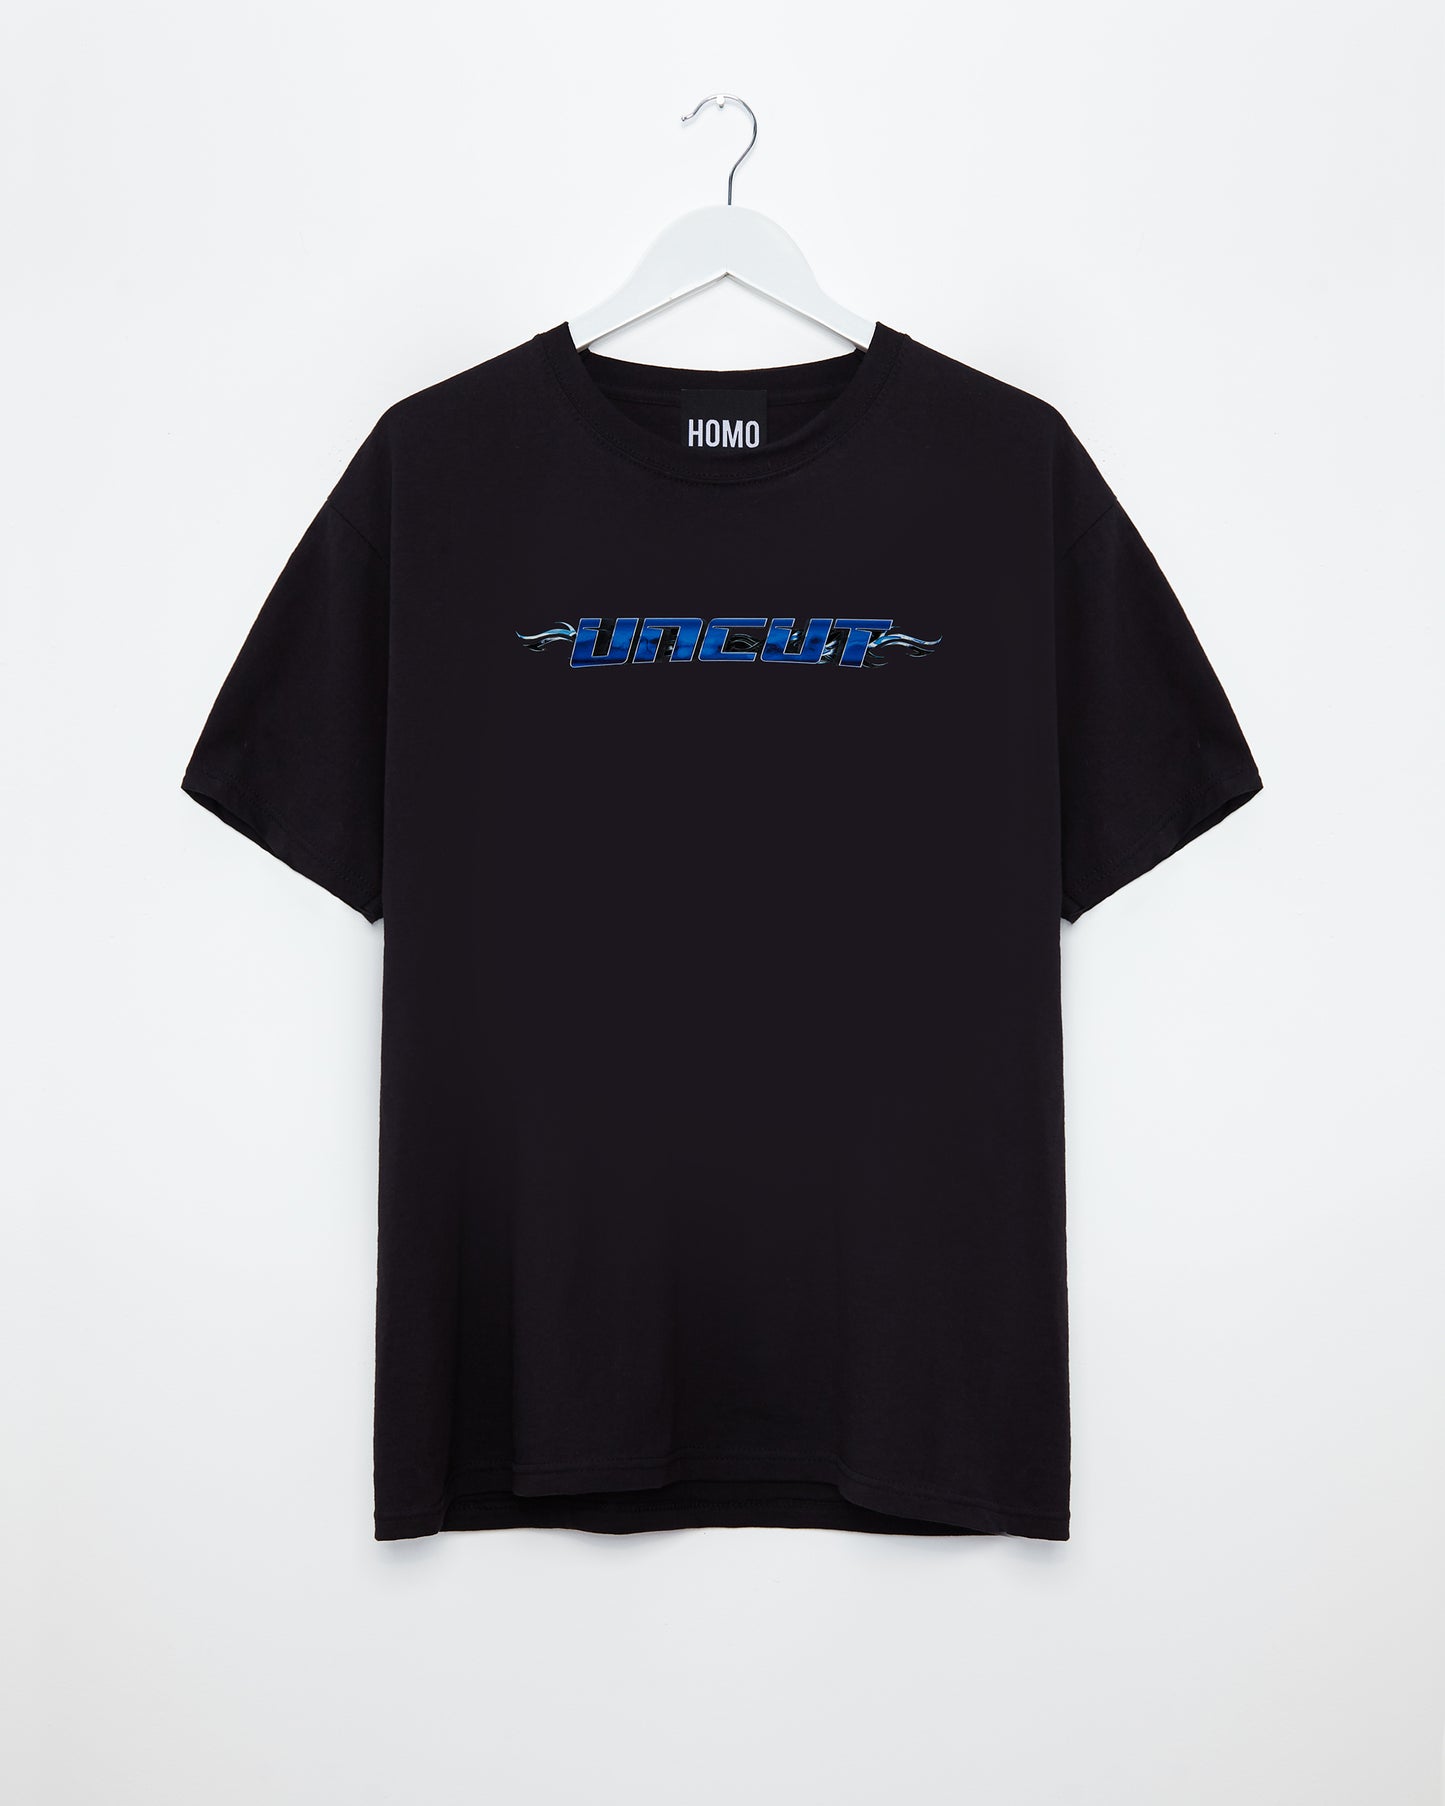 Chrome Y2K: UNCUT, blue and silver on black - tee.